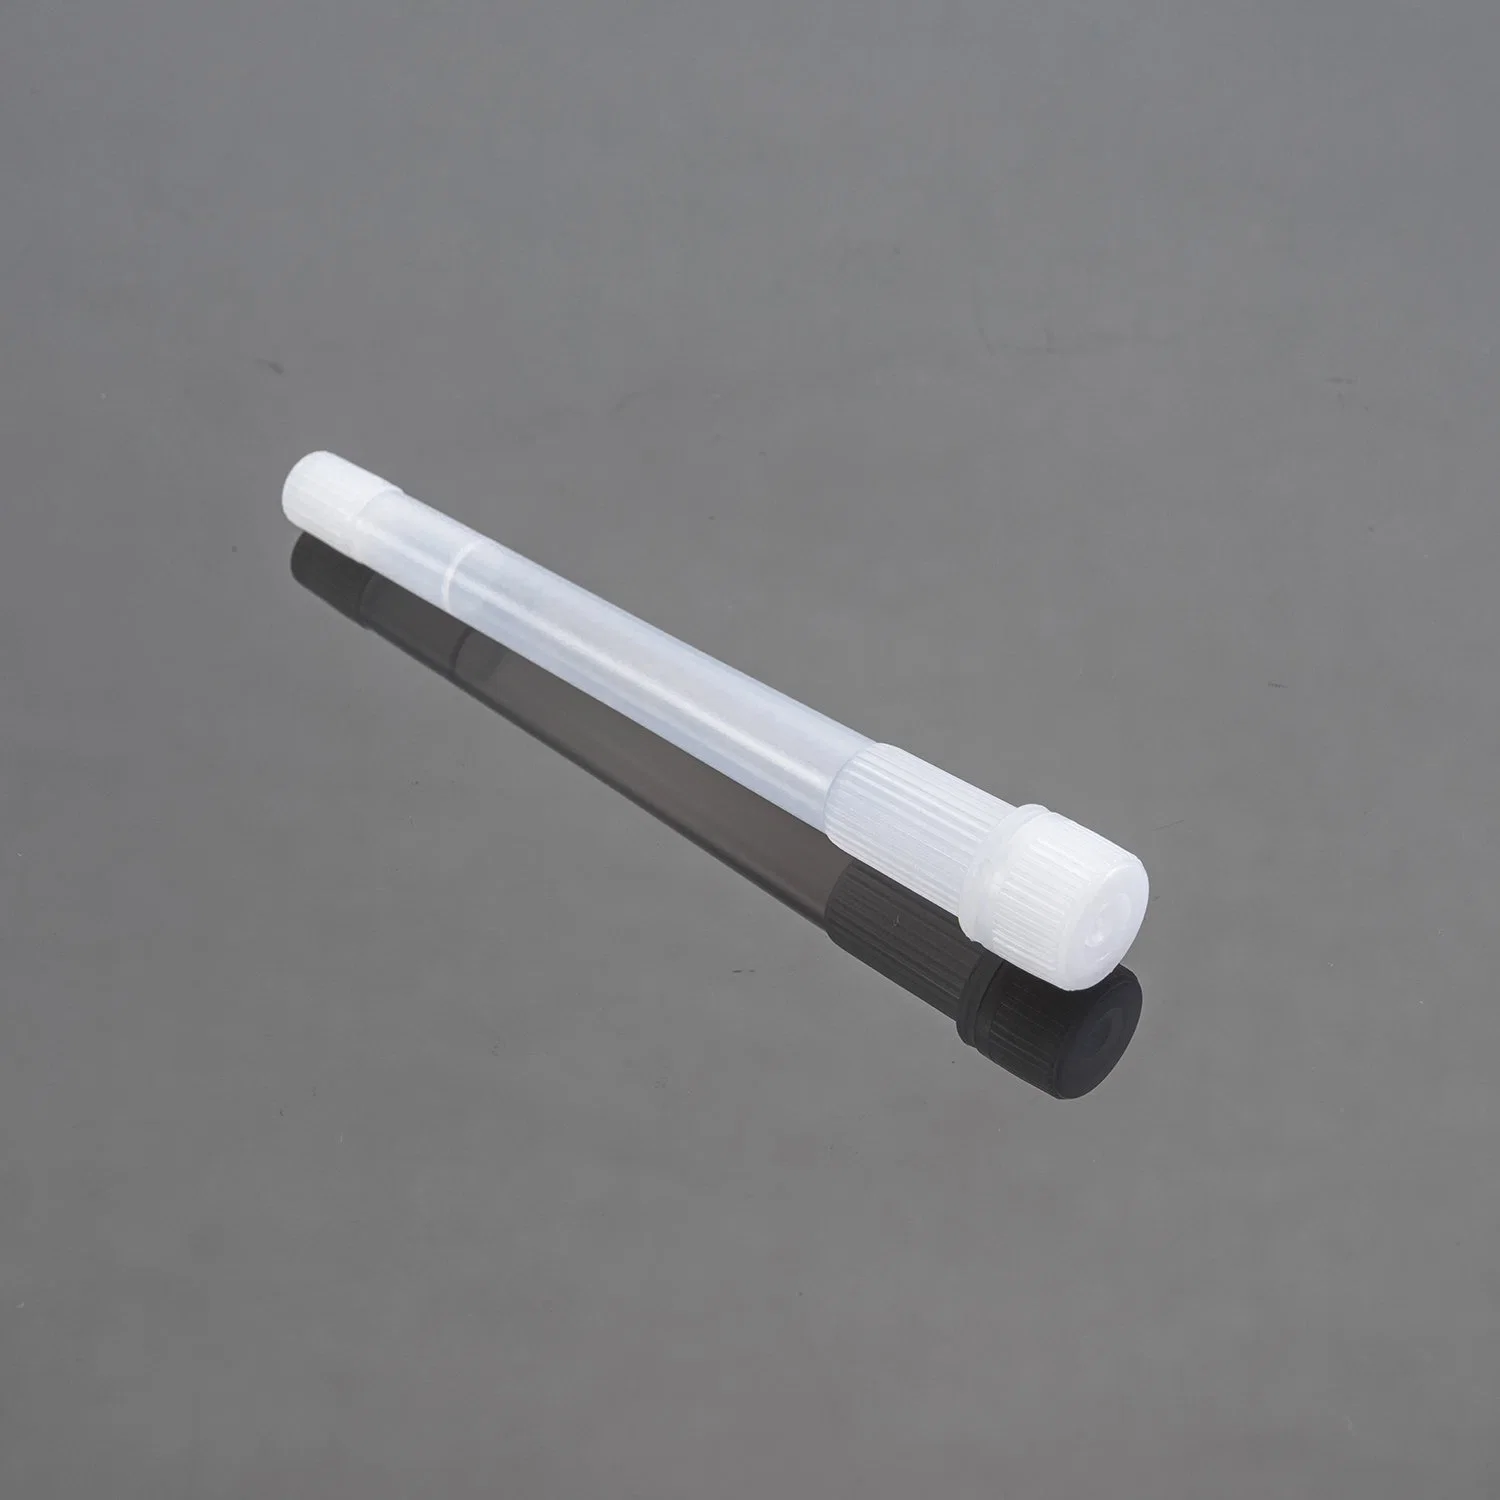 Disposable Medical High Quality Instrument Double Ends Plastic Optional Sterilize Antigen Rapid Self Test 3.5ml Double Head Extraction Tube